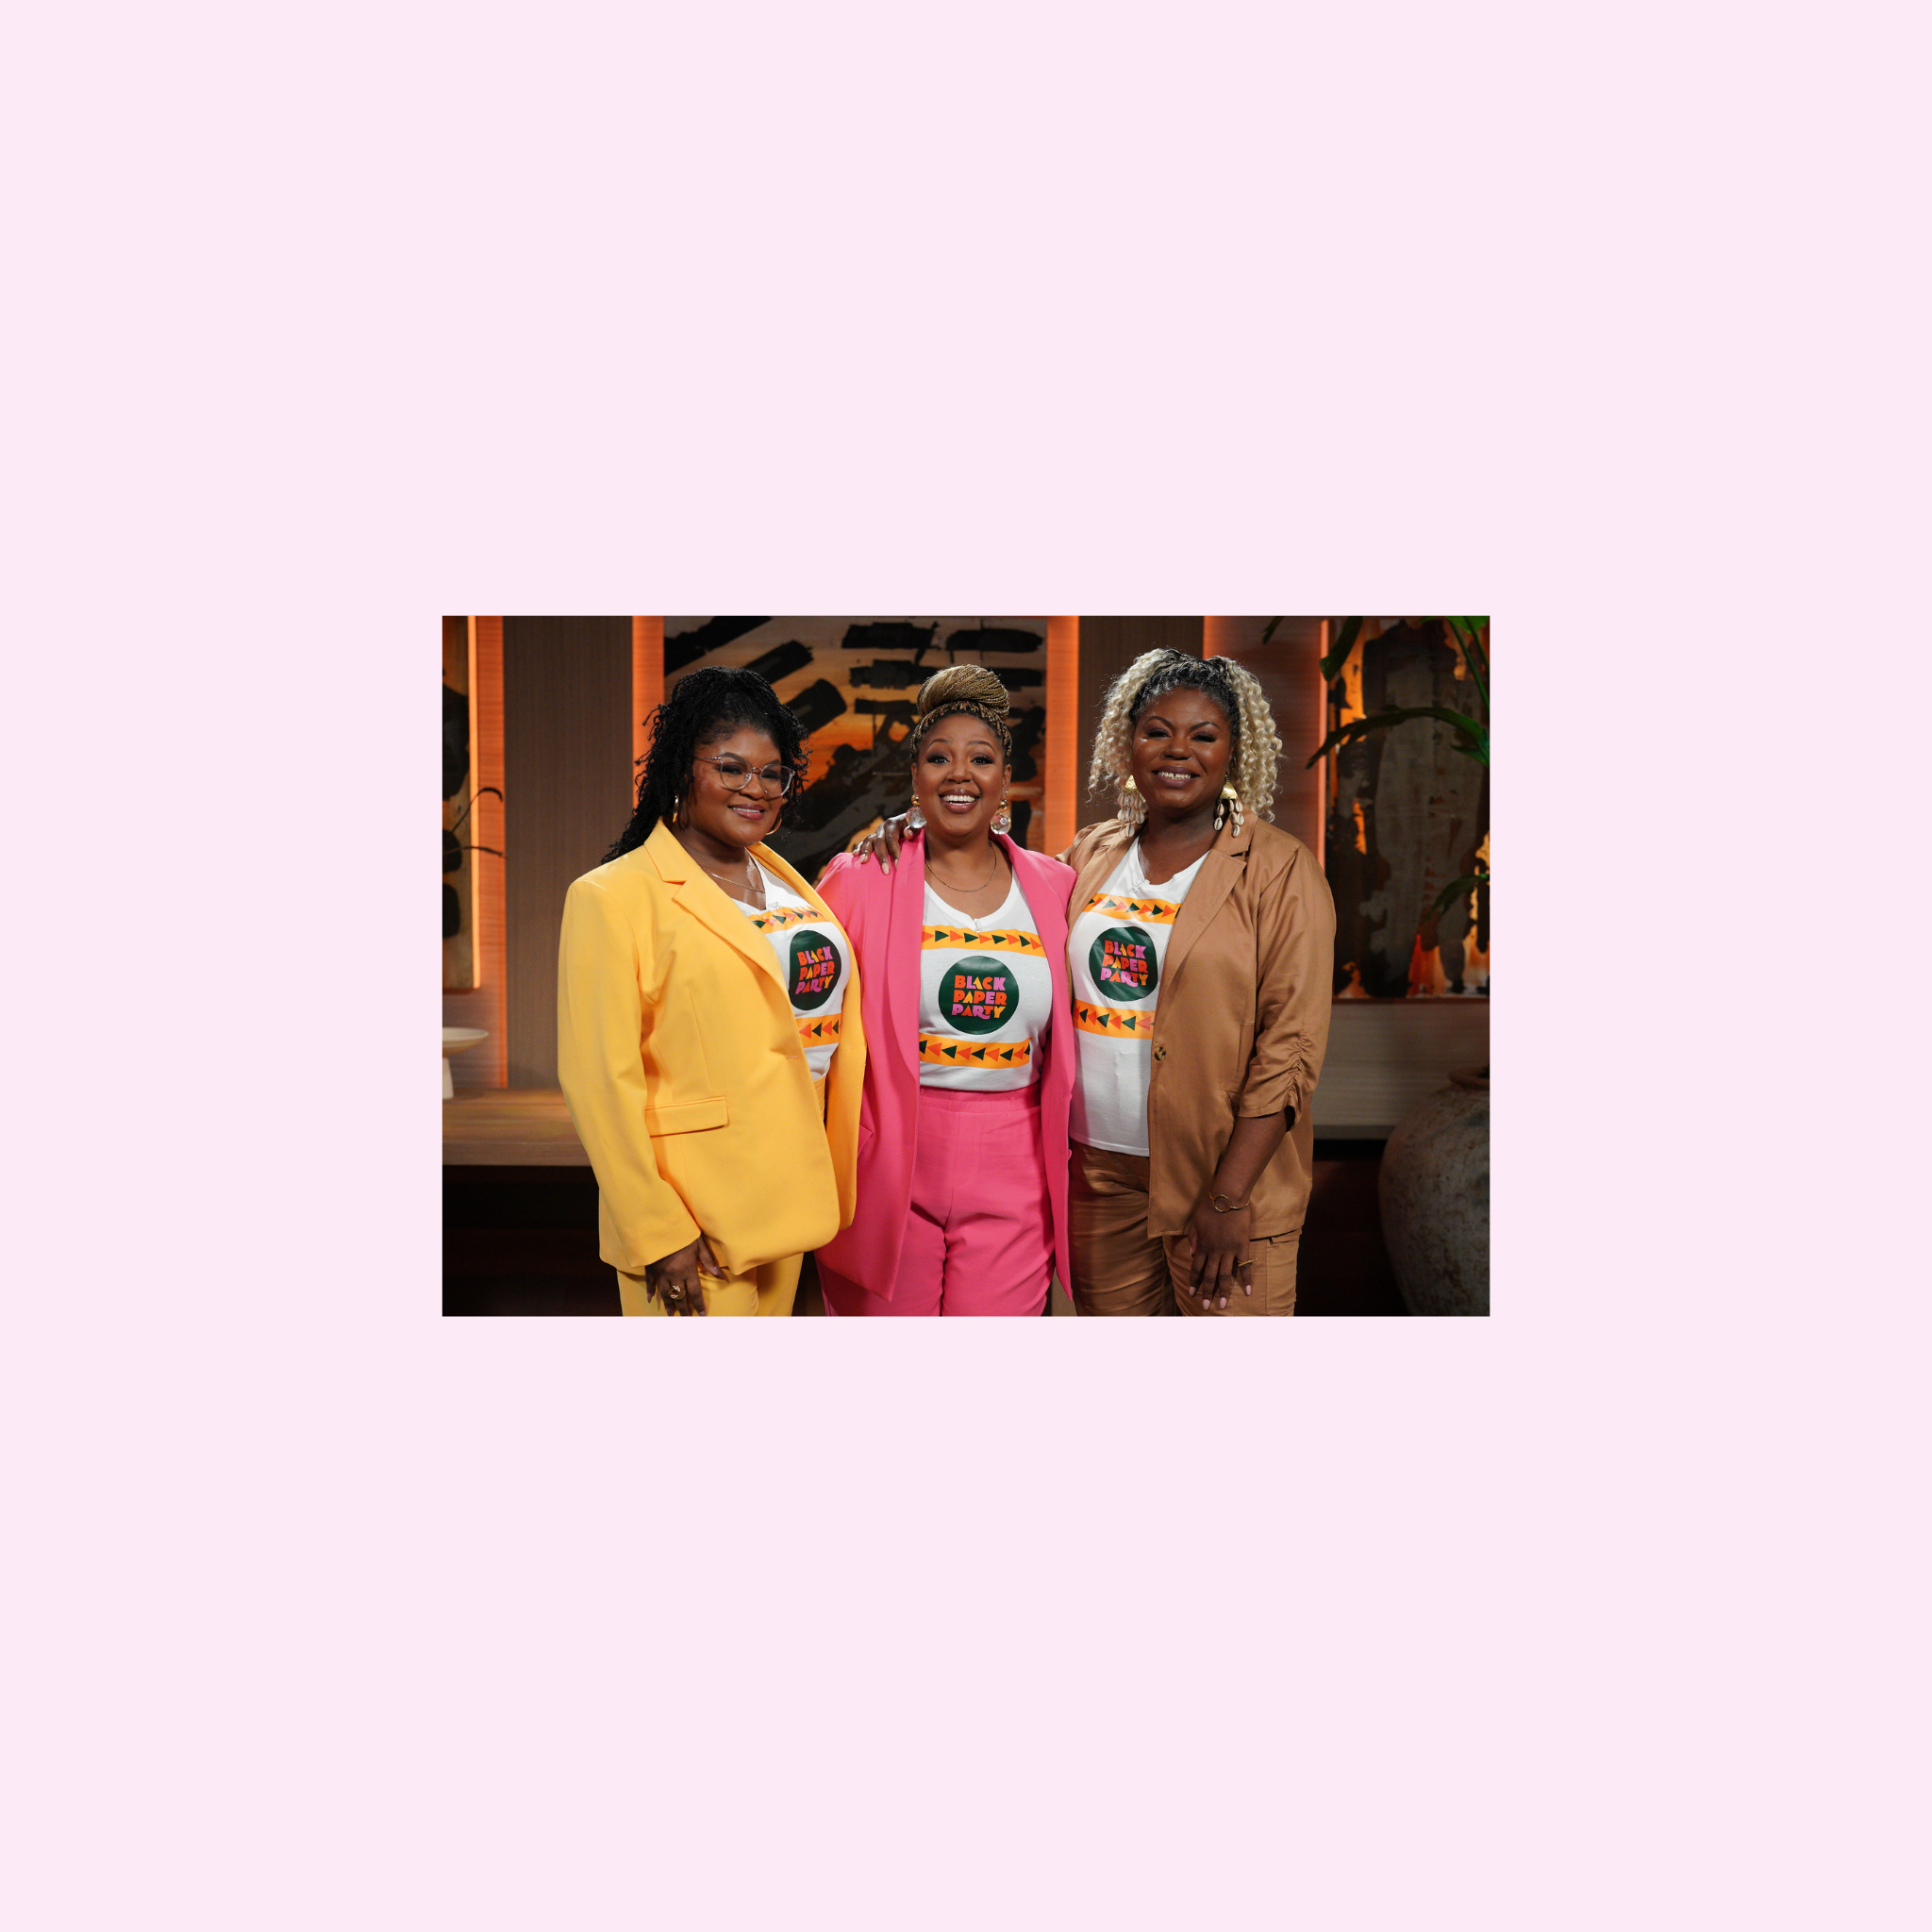  Three women are standing side-by-side, smiling, in a warmly lit room. The woman on the left wears a yellow blazer, the middle woman is in a pink jumpsuit, and the one on the right dons a beige suit. All three are sporting colorful T-shirts with a vibrant graphic design.